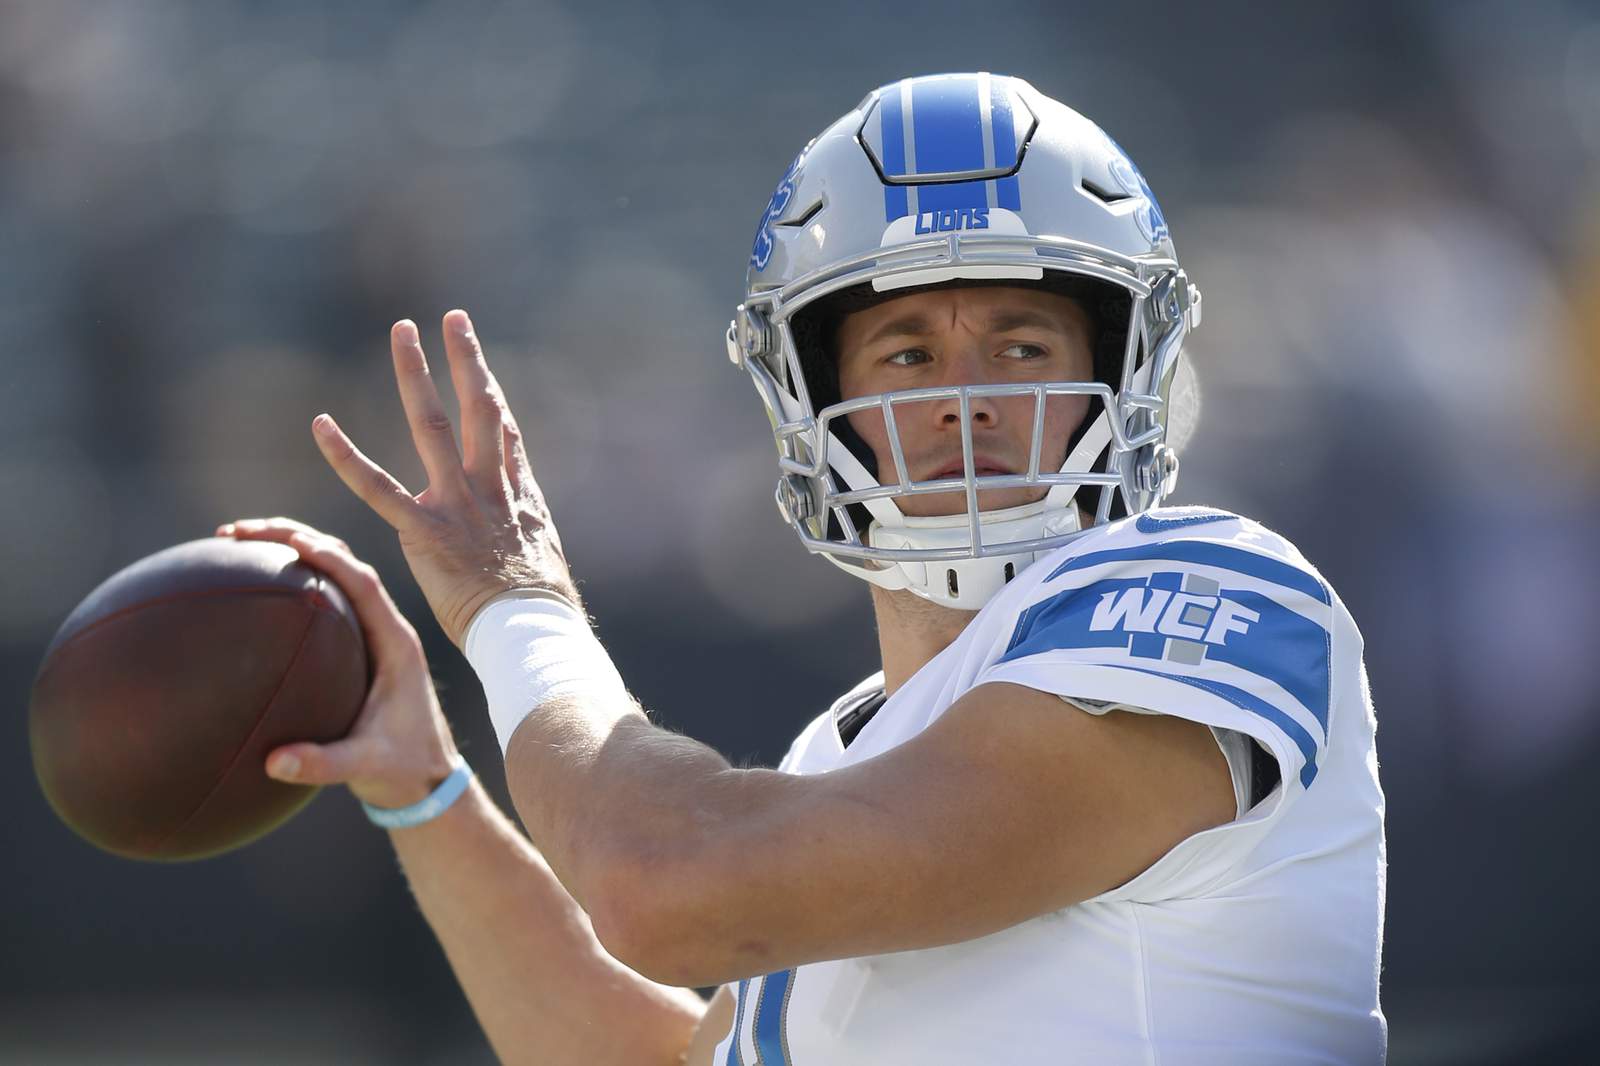 Detroit Lions QB Stafford in blog: ‘Police brutality, white privilege, racism - it’s all real. It’s time we stop pretending'